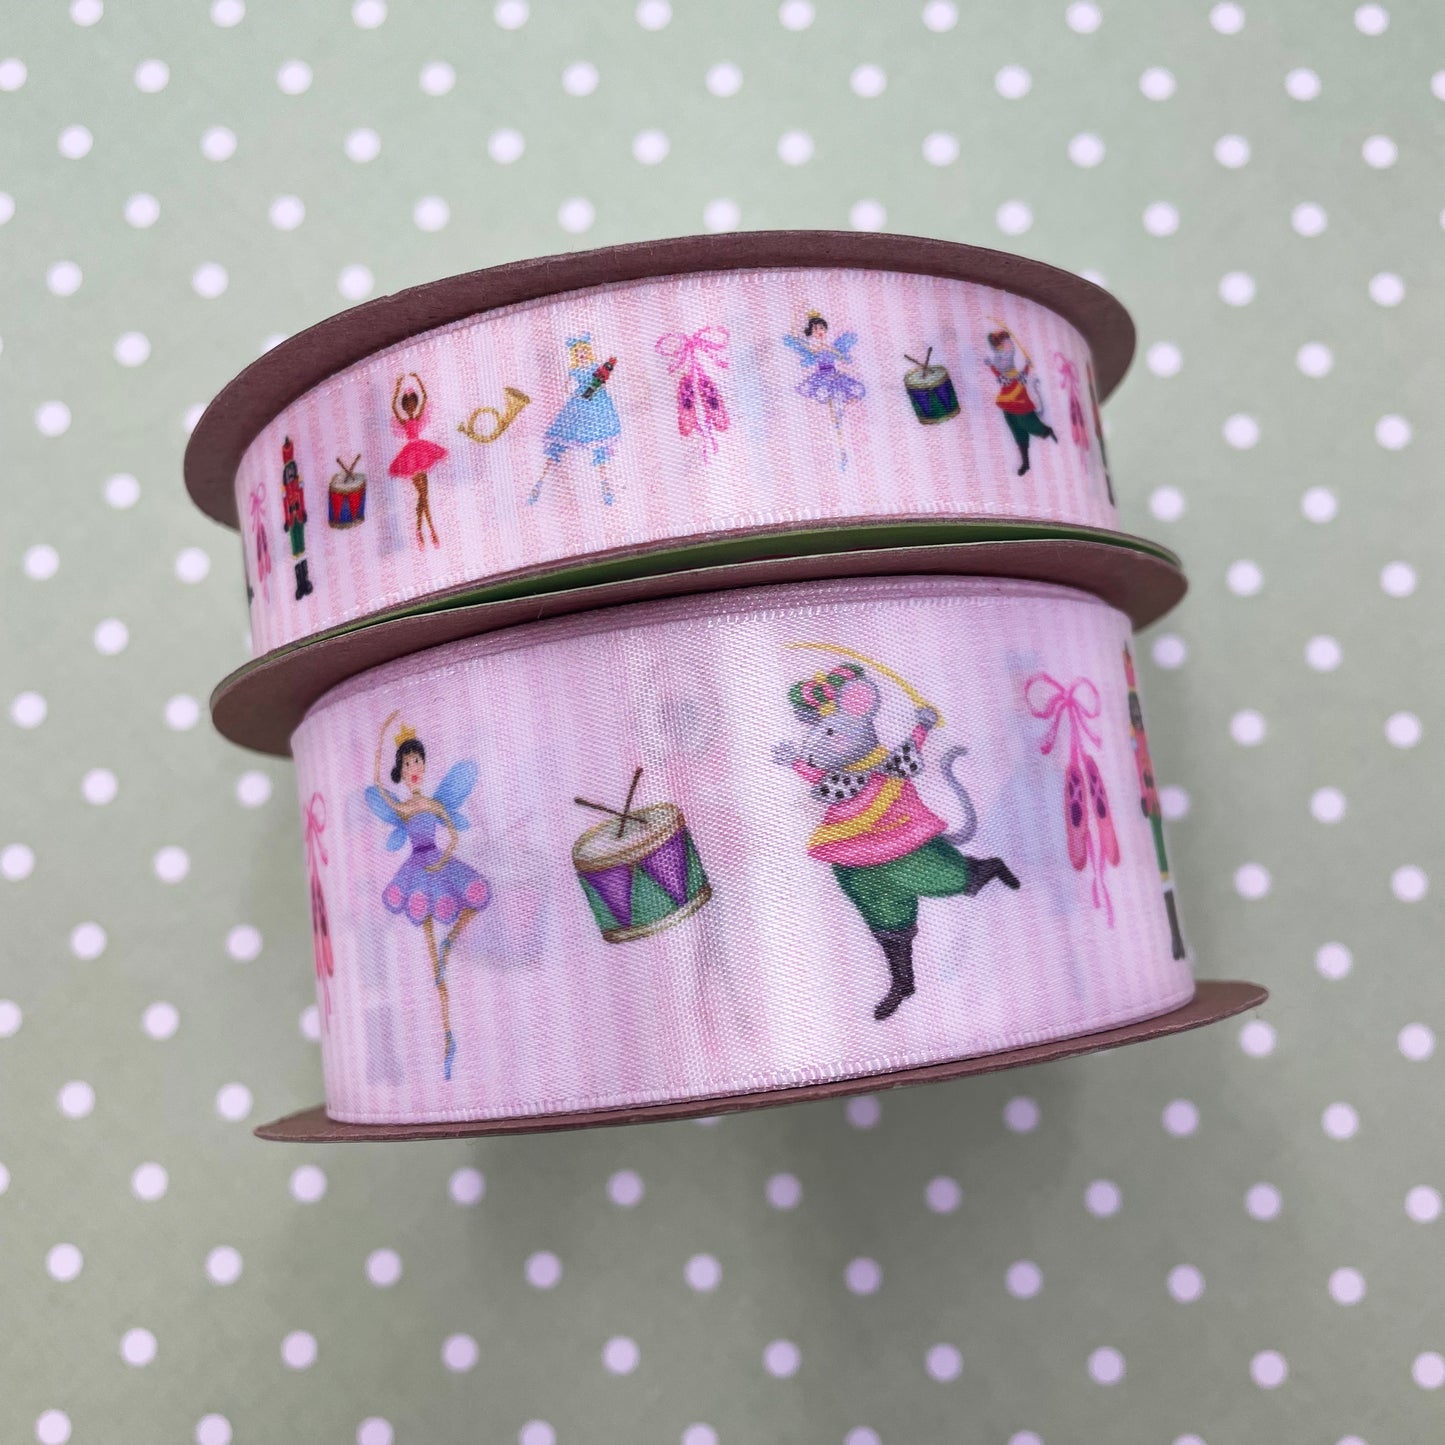 Nutcracker Ballet ribbon featuring all the characters printed on 1.5" white satin